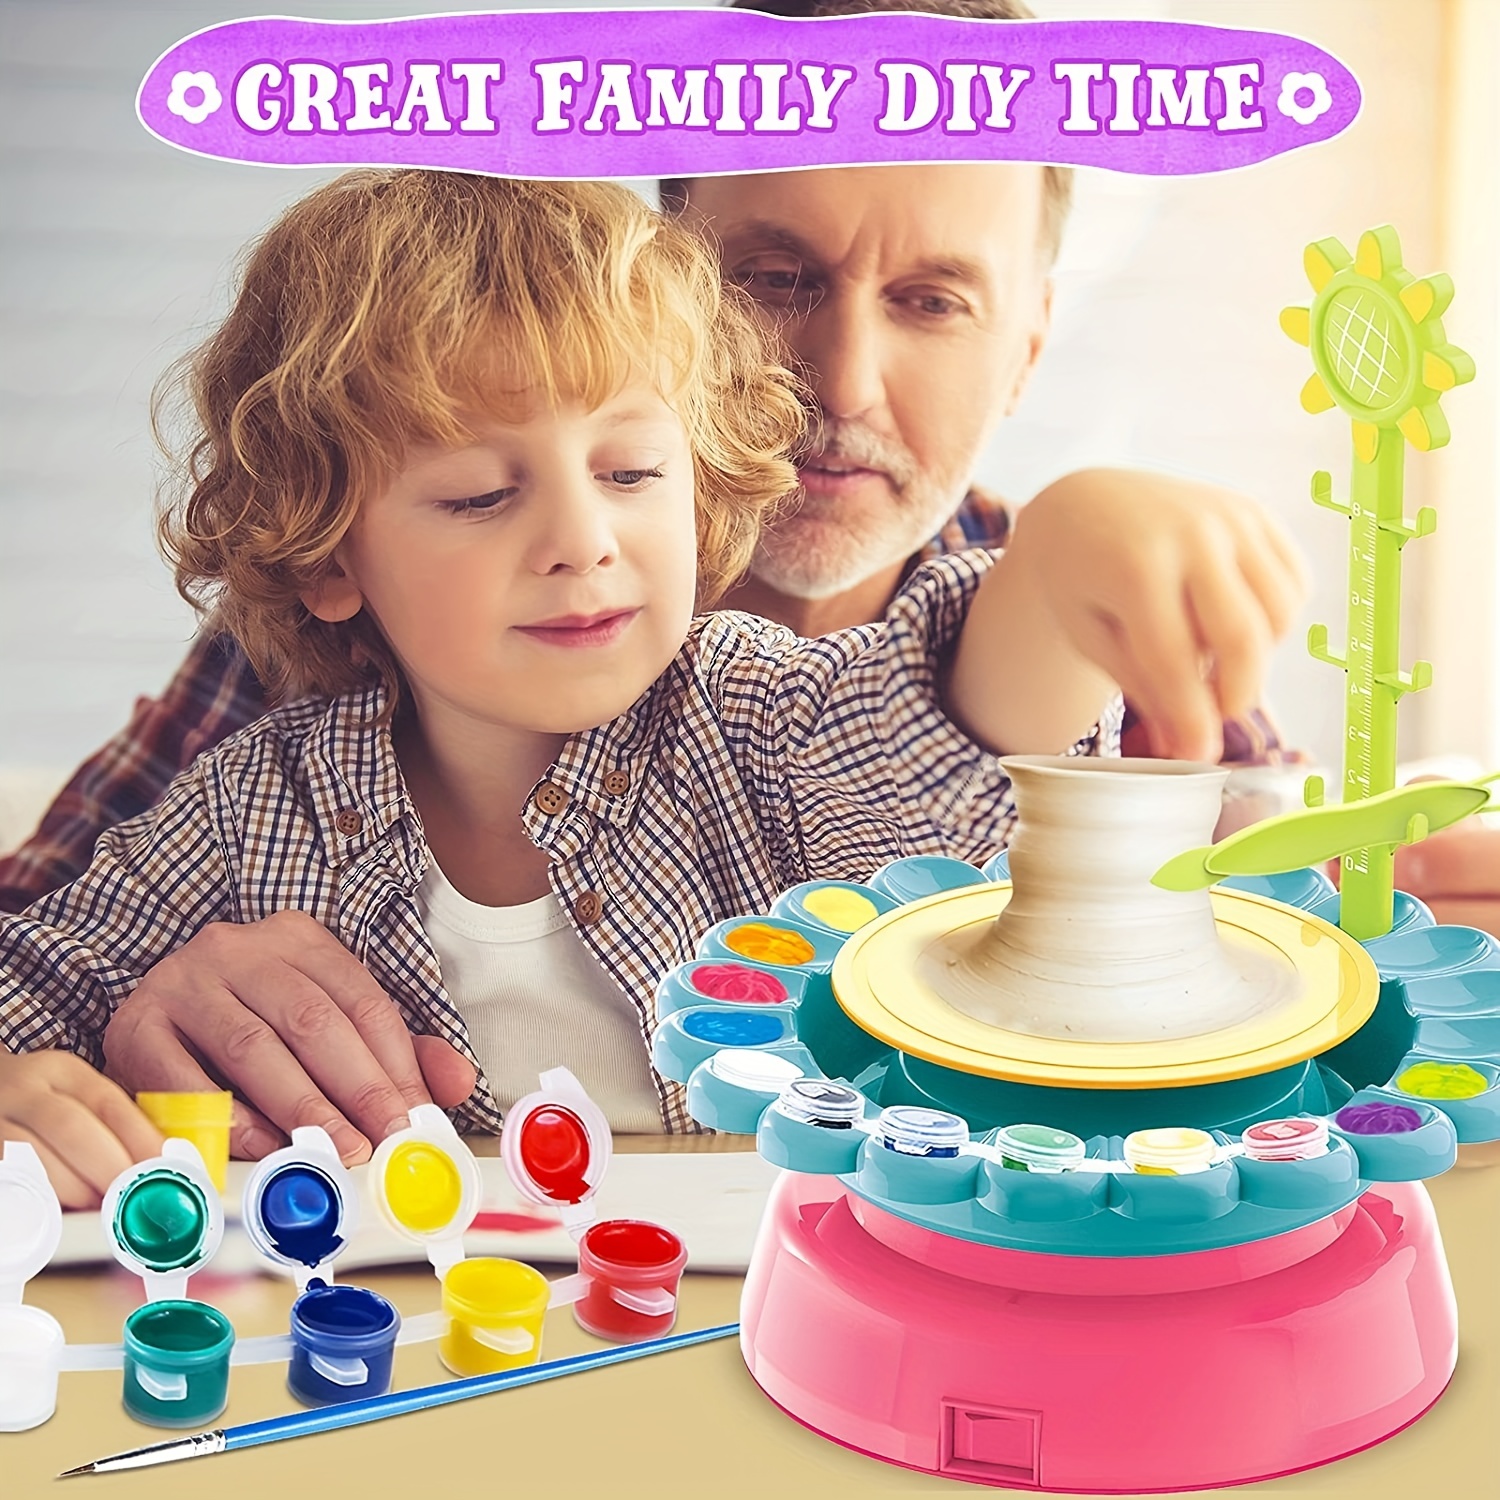 Kids Pottery Wheel Kit - Complete Pottery Wheel And Painting Kit